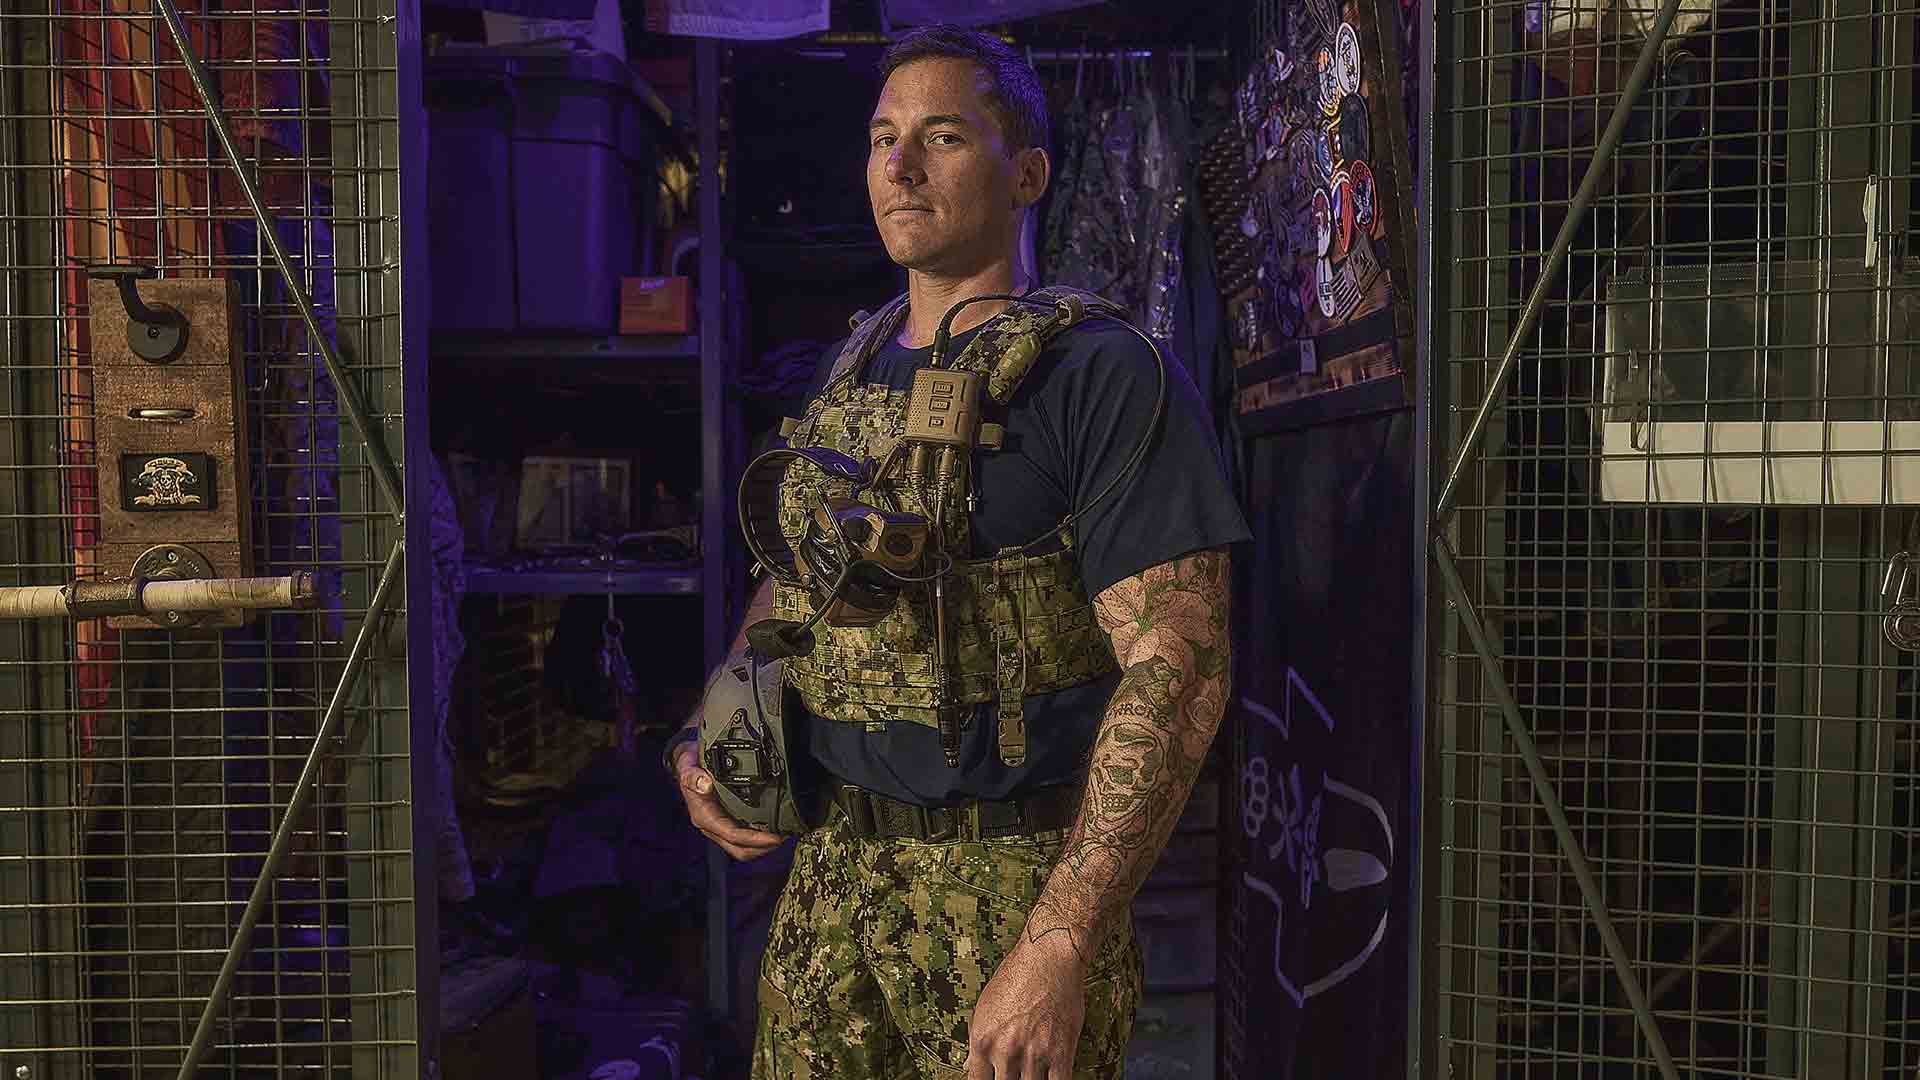 US Navy SWCC sailor SB1 Nick O’Sullivan stands in front of gear locker wearing his Special Warfare Combatant-Craft Crewman gear.